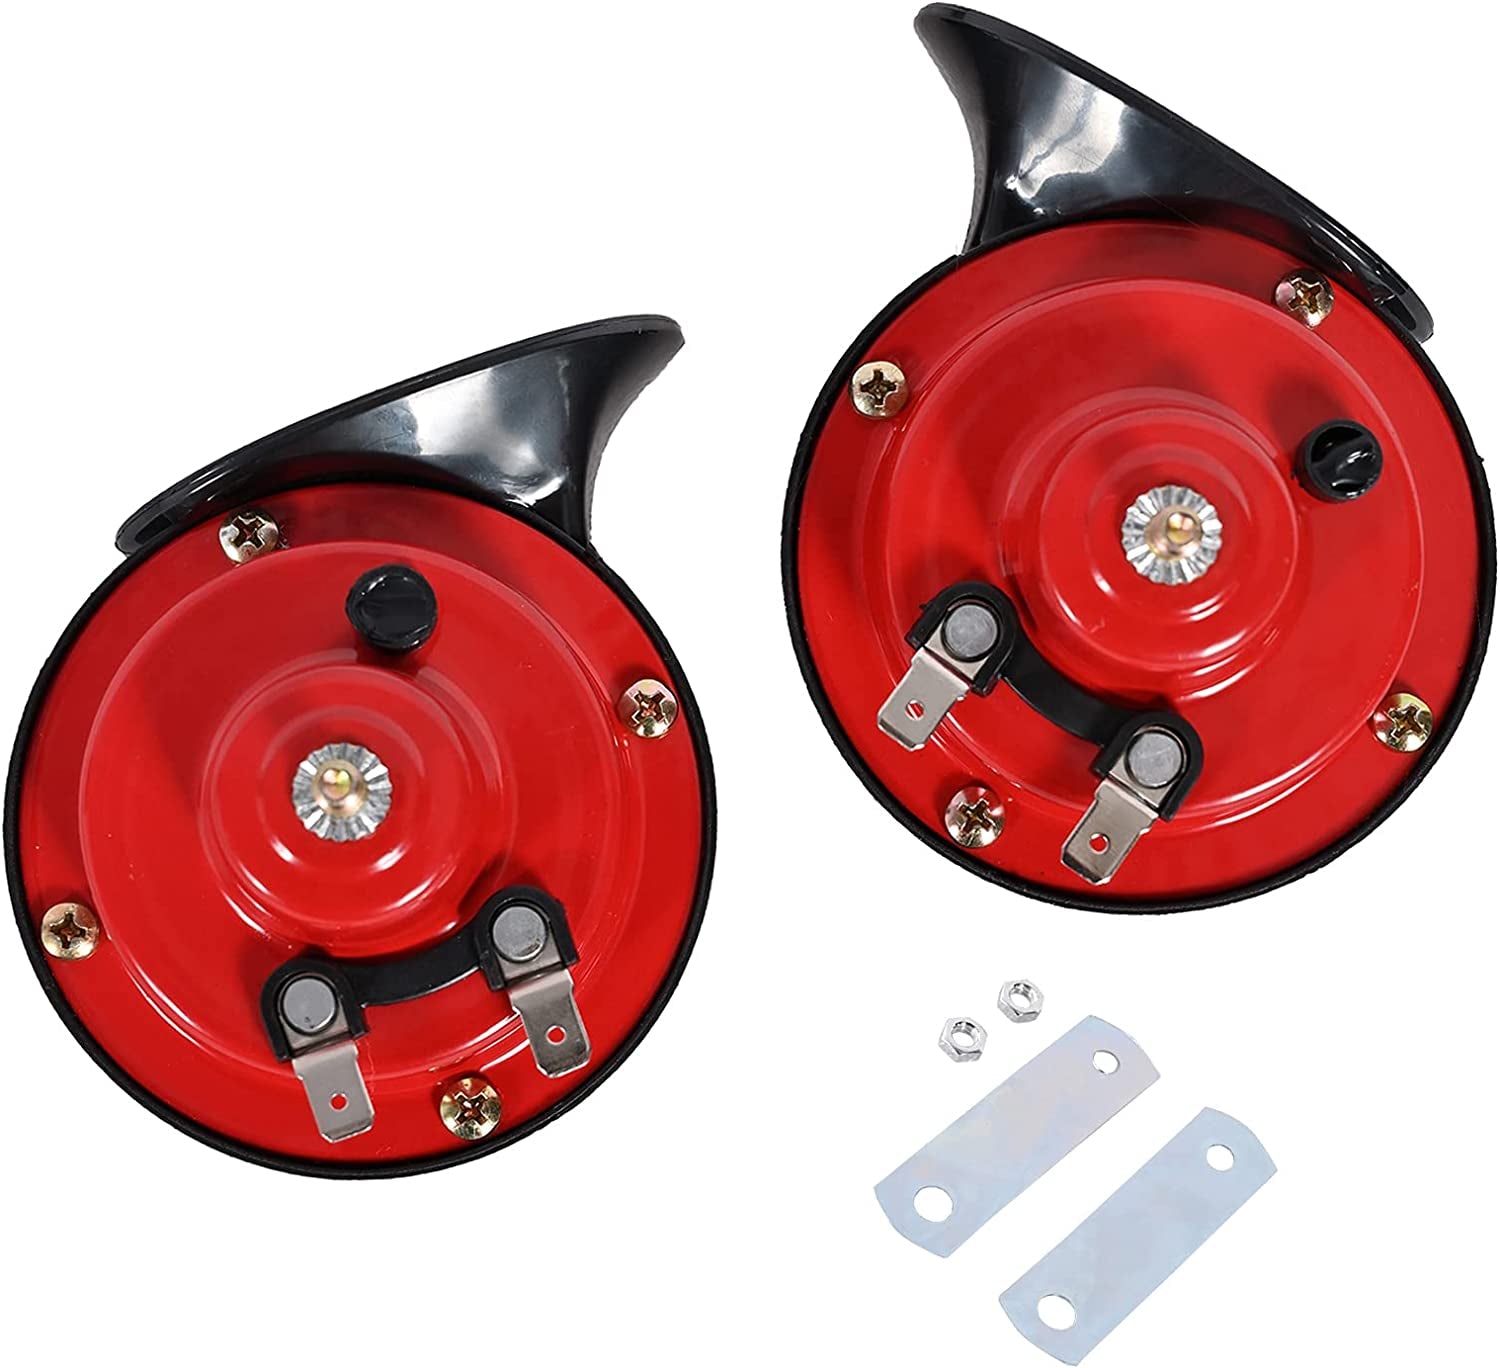 2PCS 105 DB Electric Super Loud Train Horn, 12V Universal Vehicle Copper Wire Double Snail Air Speakers for Trucks/Boats/Cars/Motorcycle (Red)